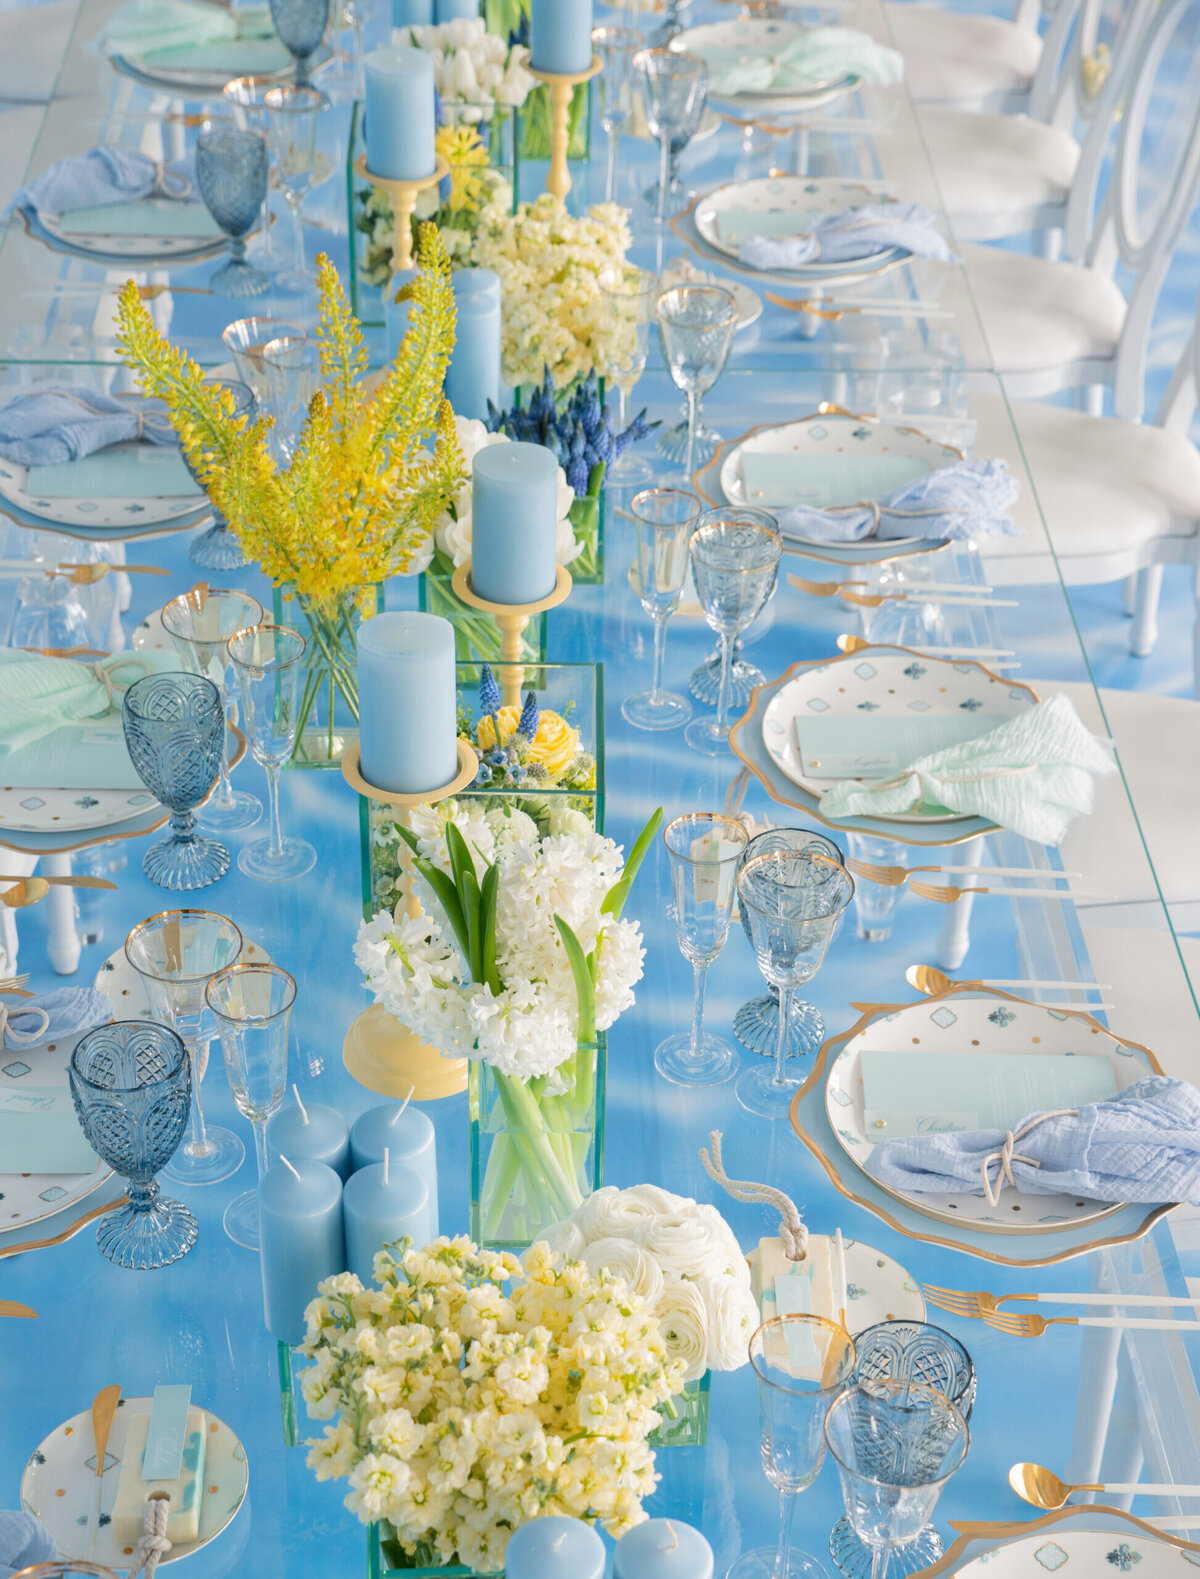 Diana-Pires-Events-Wedluxe-Little-Boy-Blue-41-scaled